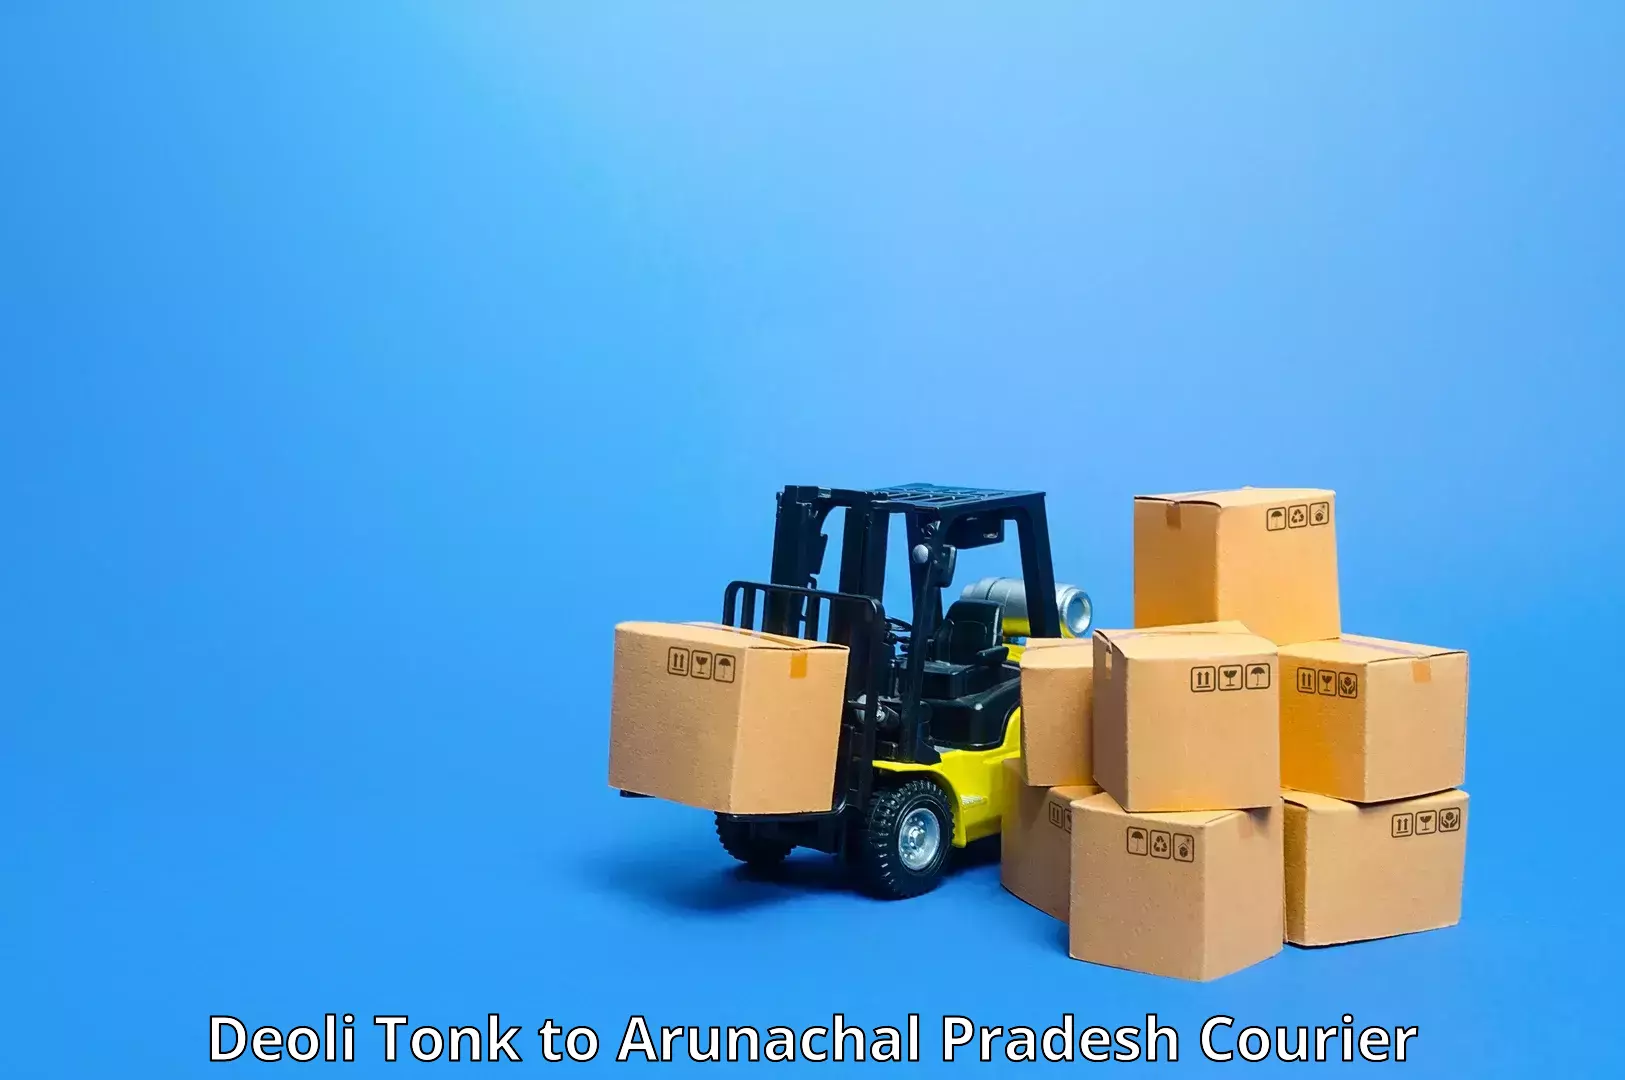 High-speed delivery Deoli Tonk to Dirang